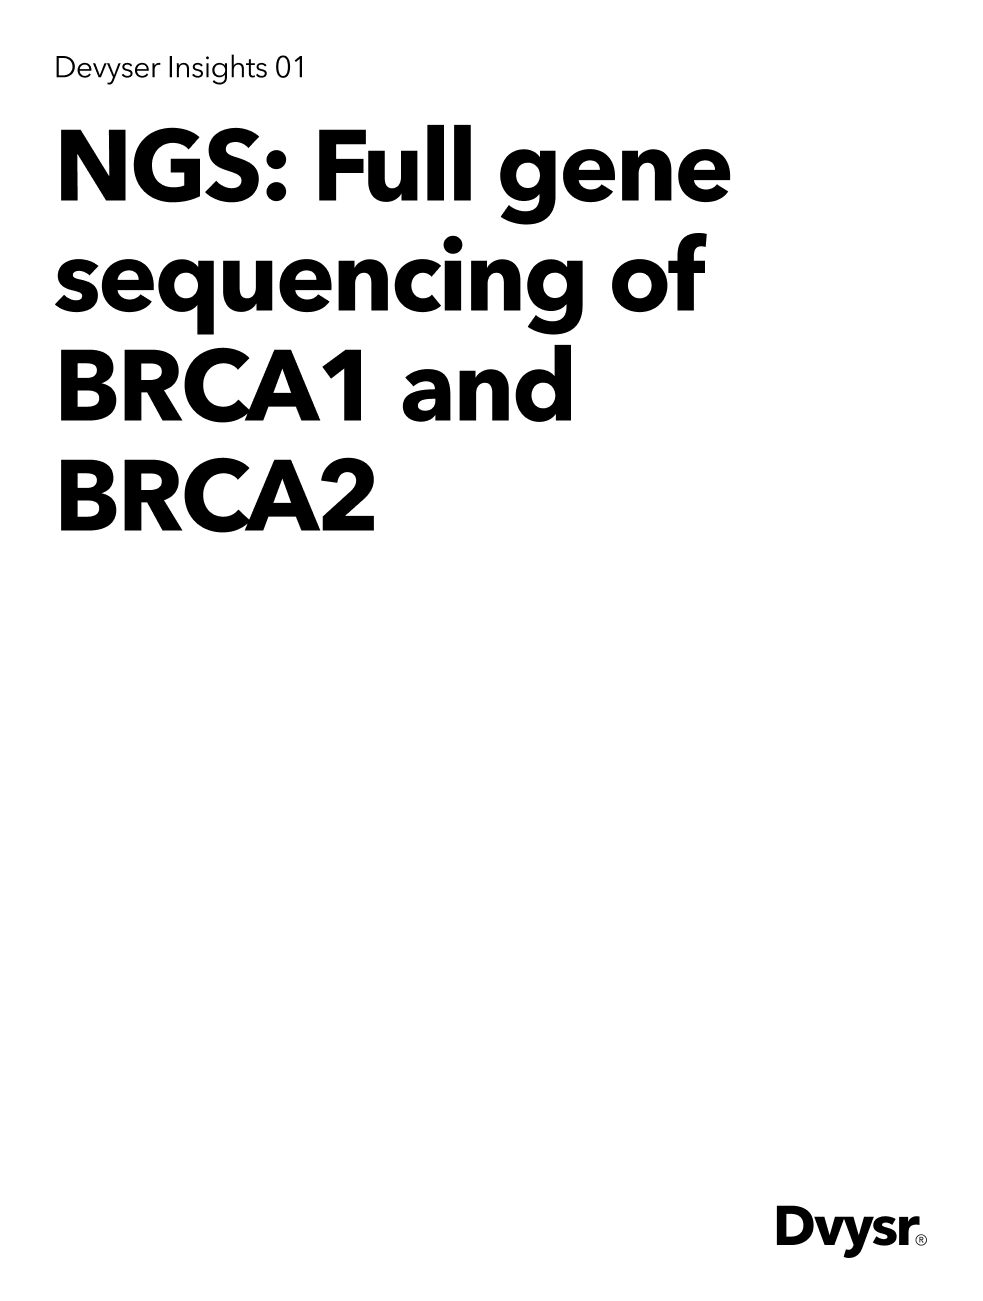 NGS: Full gene sequencing of BRCA1 and BRCA2